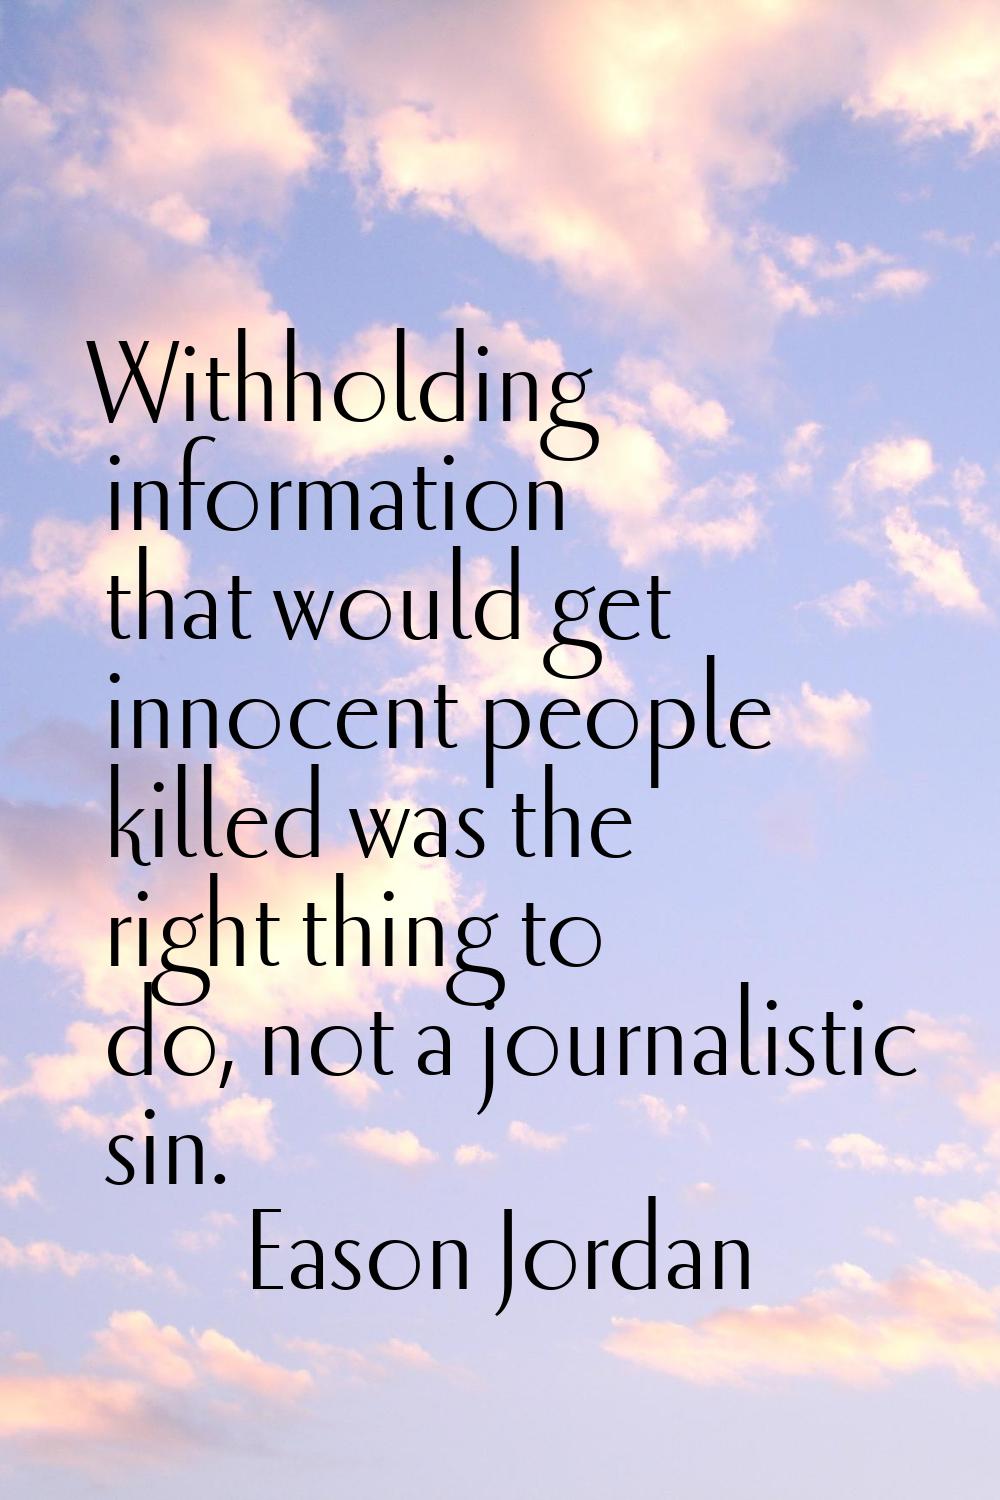 Withholding information that would get innocent people killed was the right thing to do, not a jour